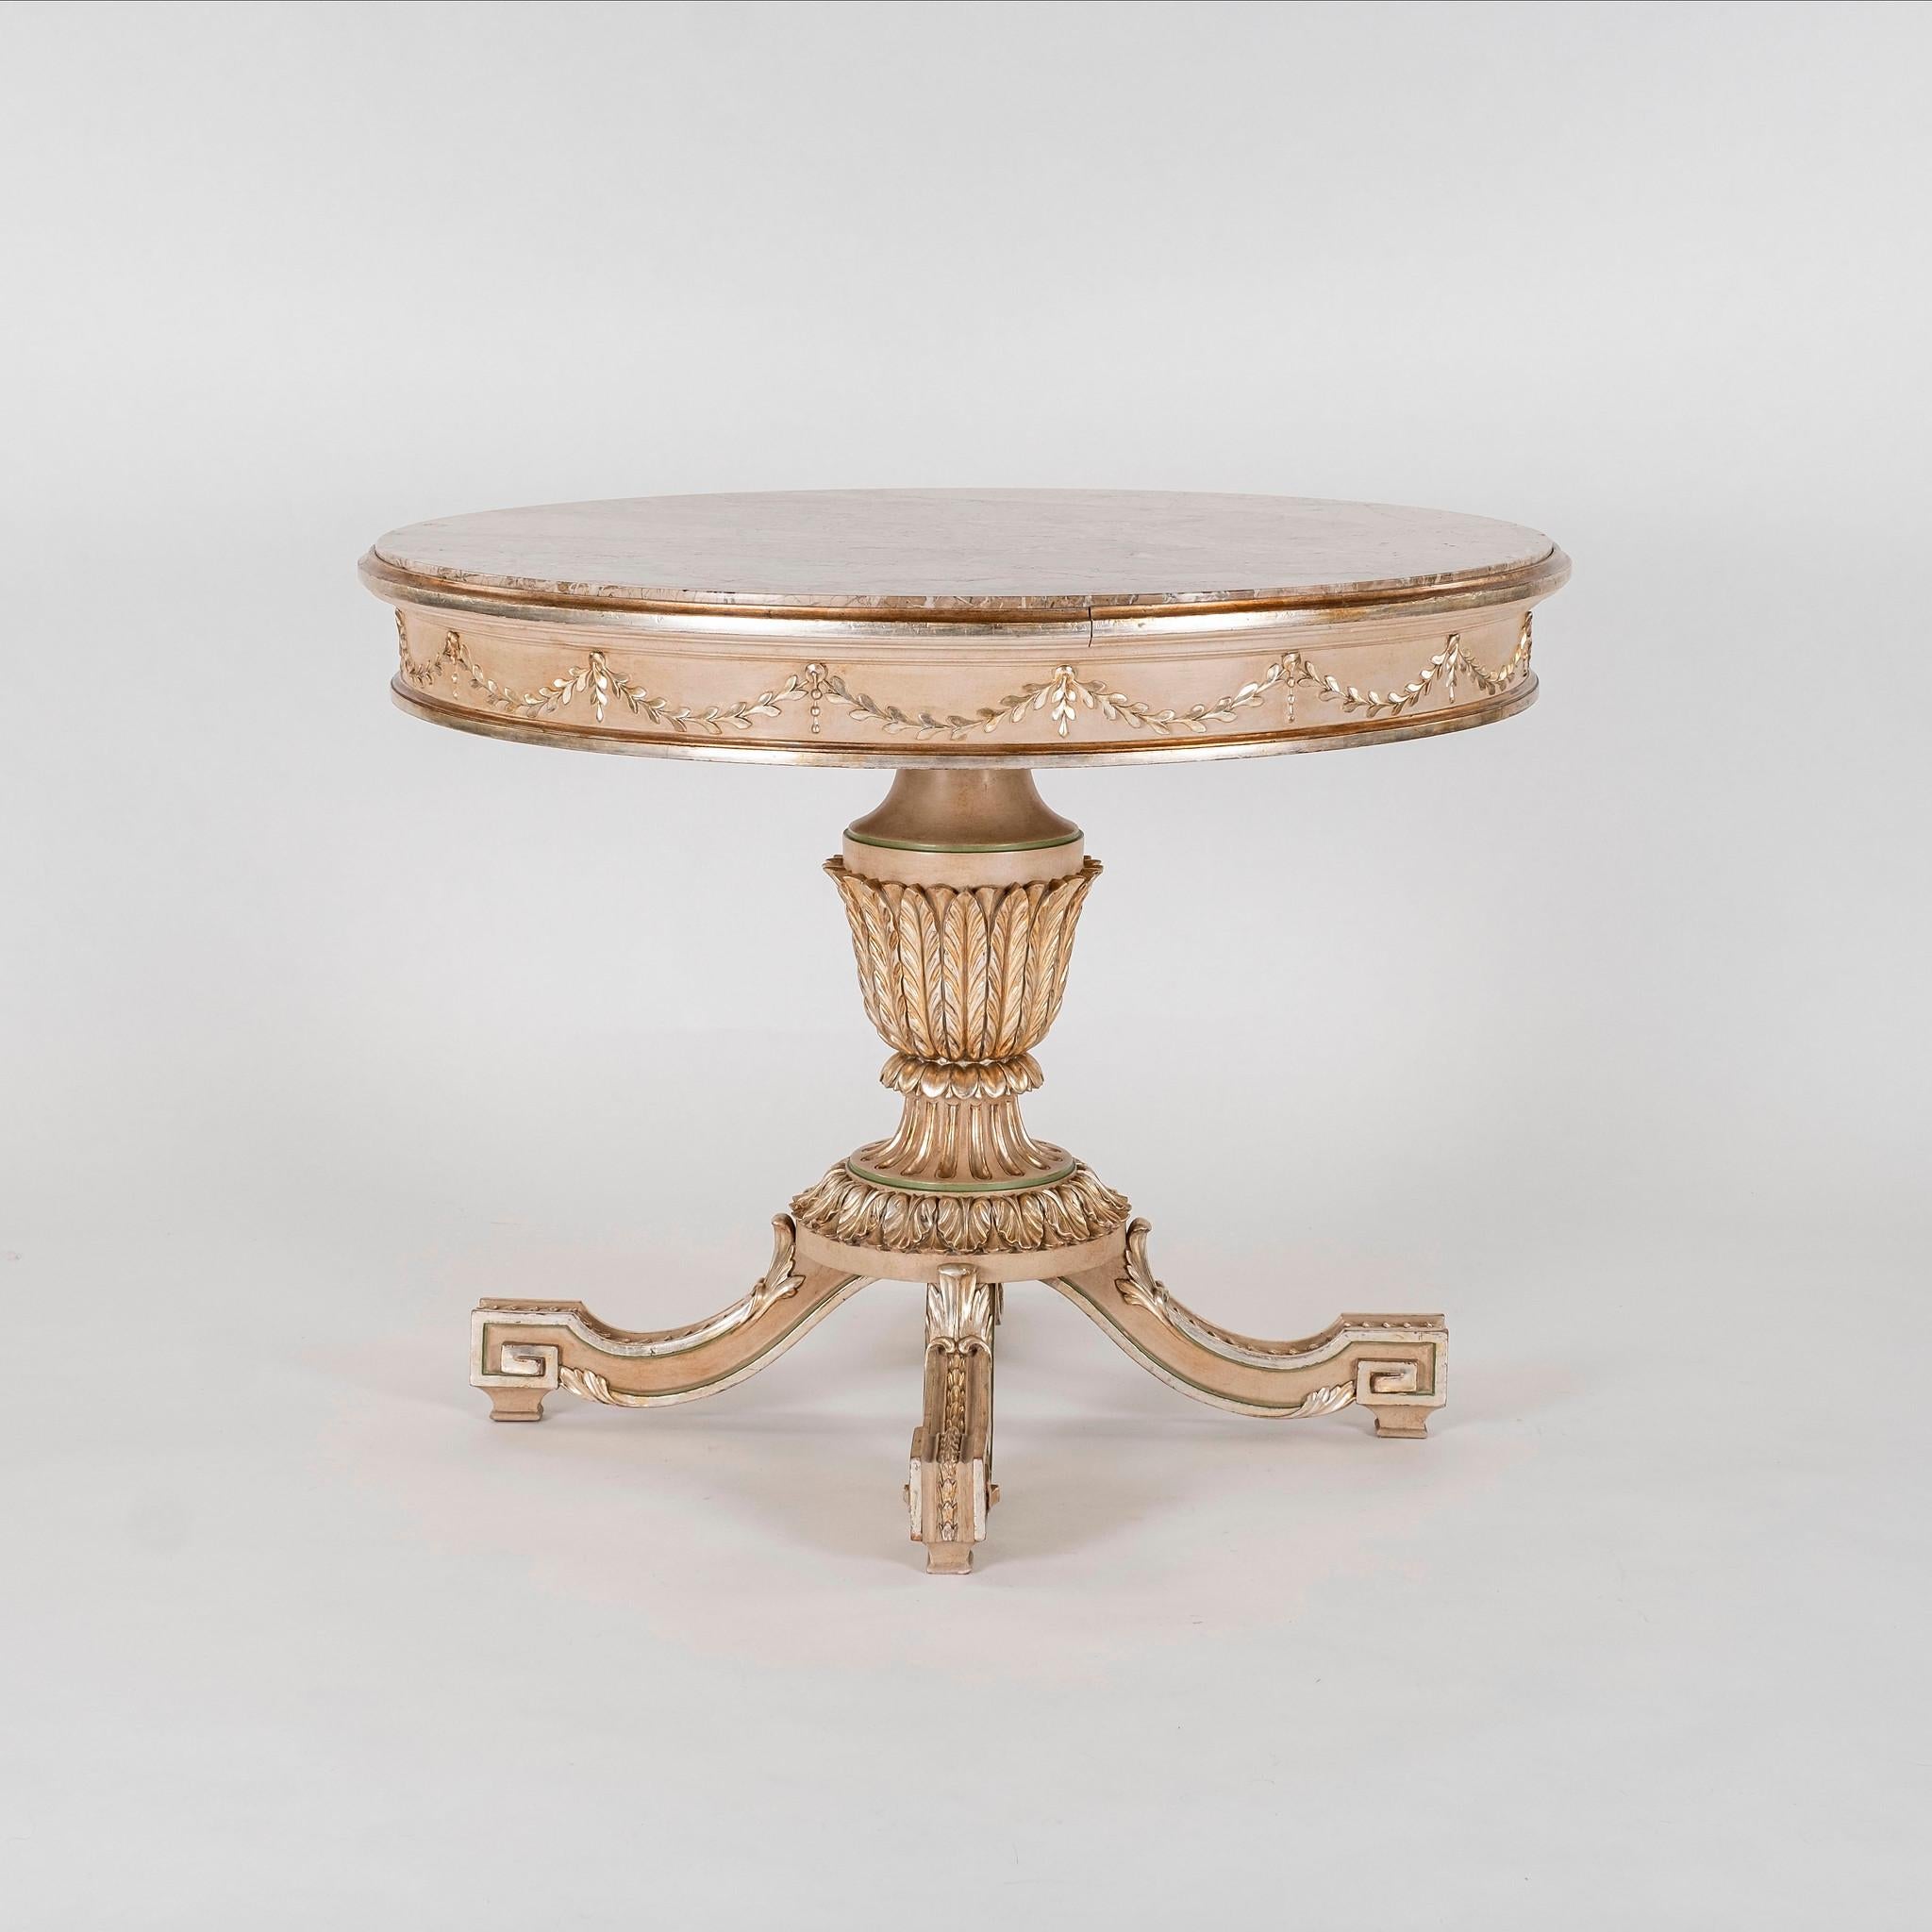 20th century Italian neoclassical style paint and parcel gilt center table with marble top.